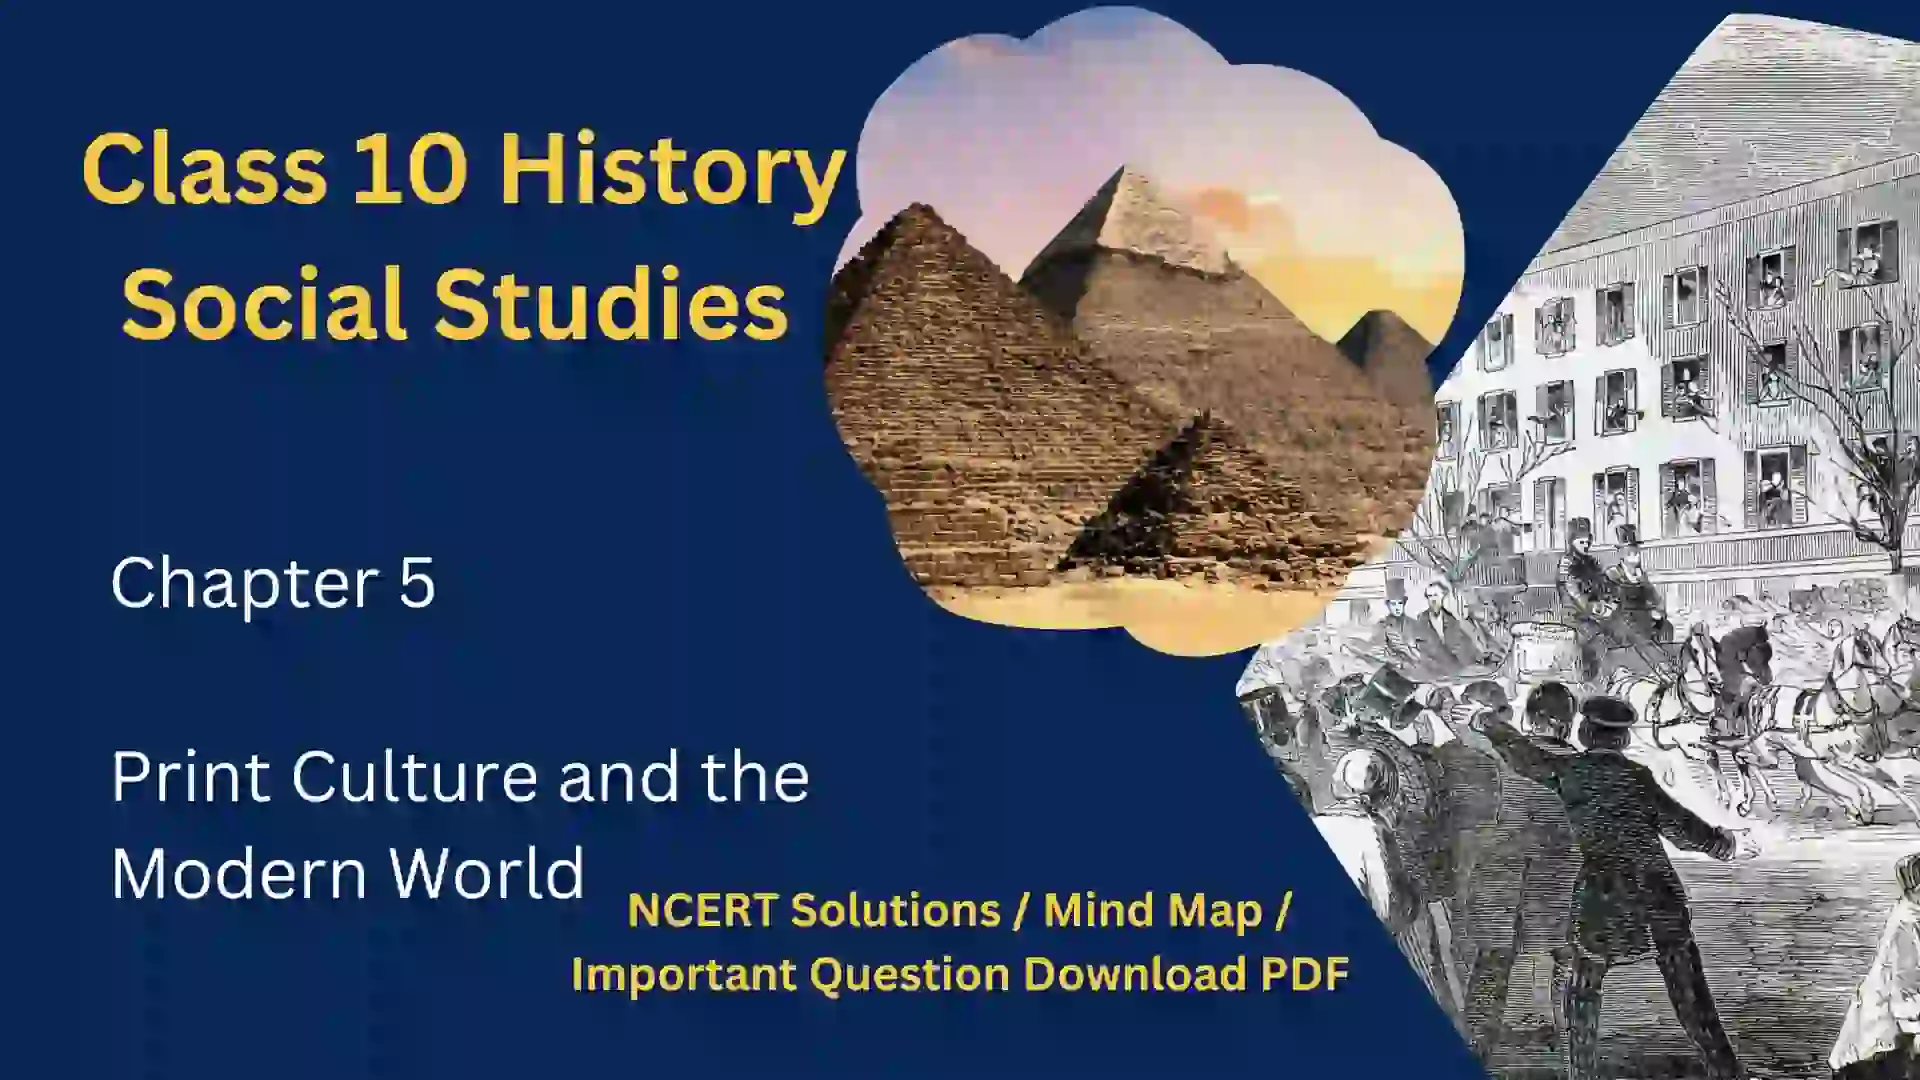 Class 10 Social Studies History Chapter 5 Print Culture and the Modern World